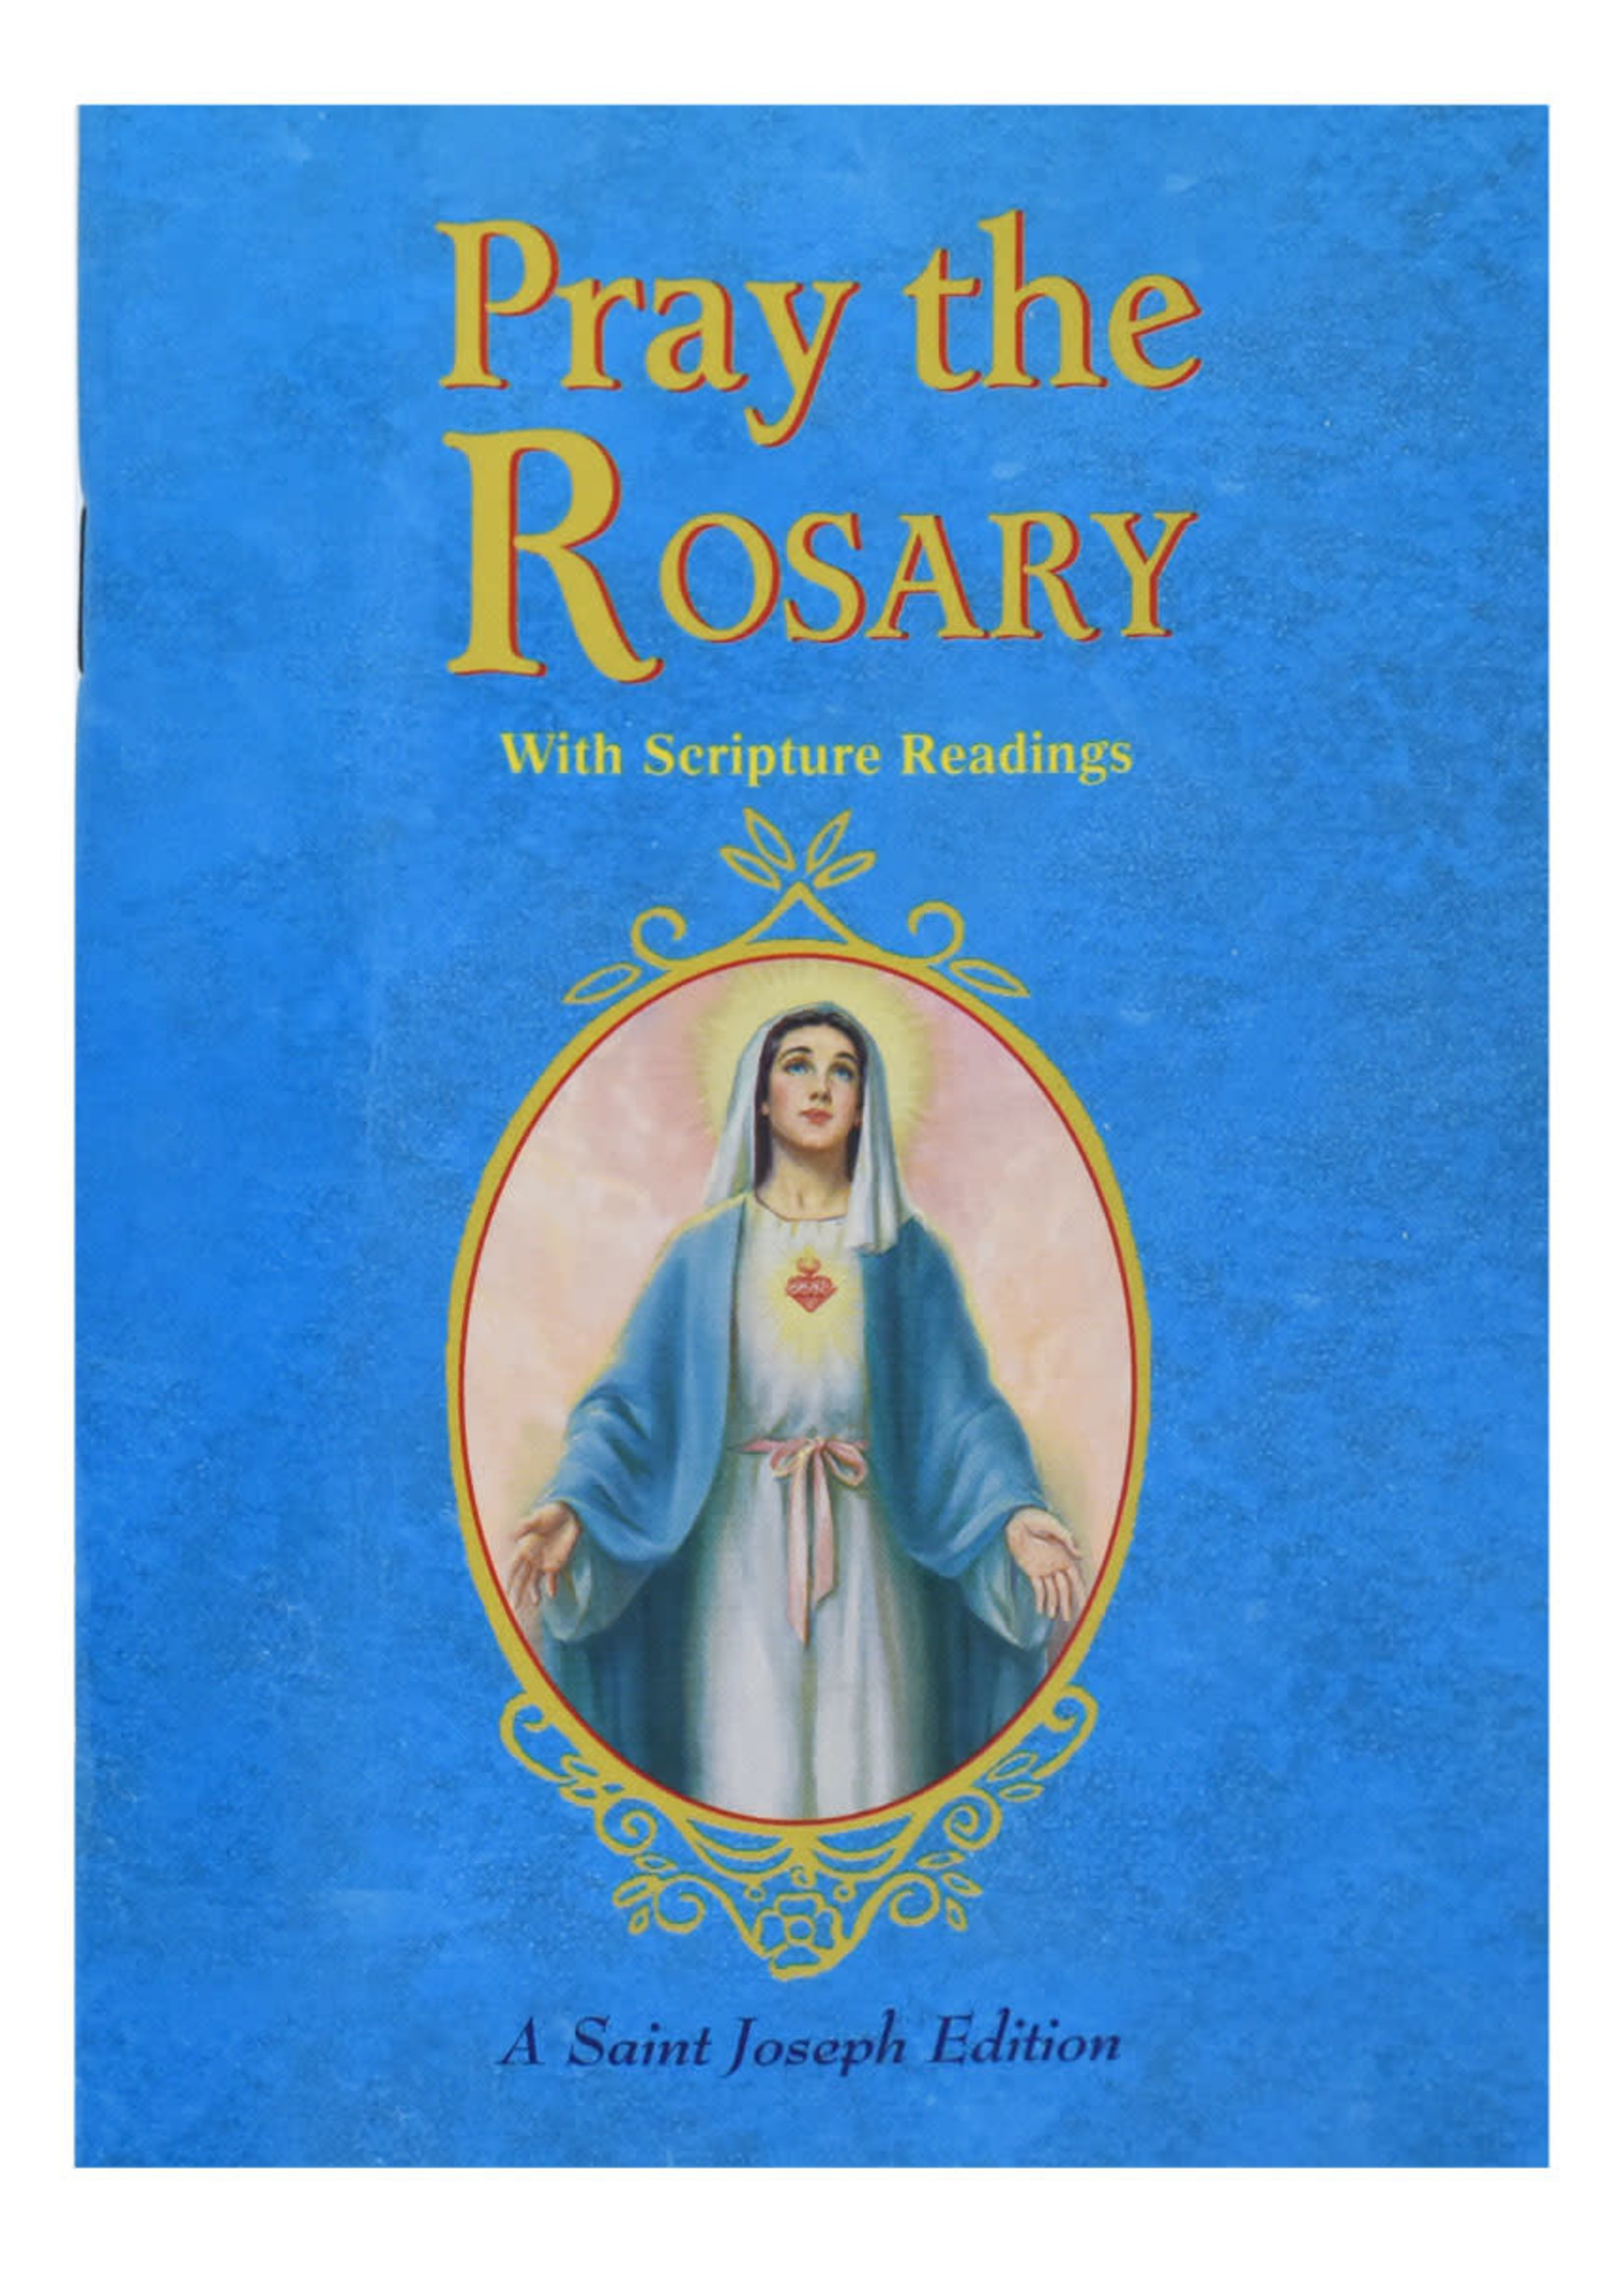 Pray the Rosary LP Expanded Edition with Scripture Readings